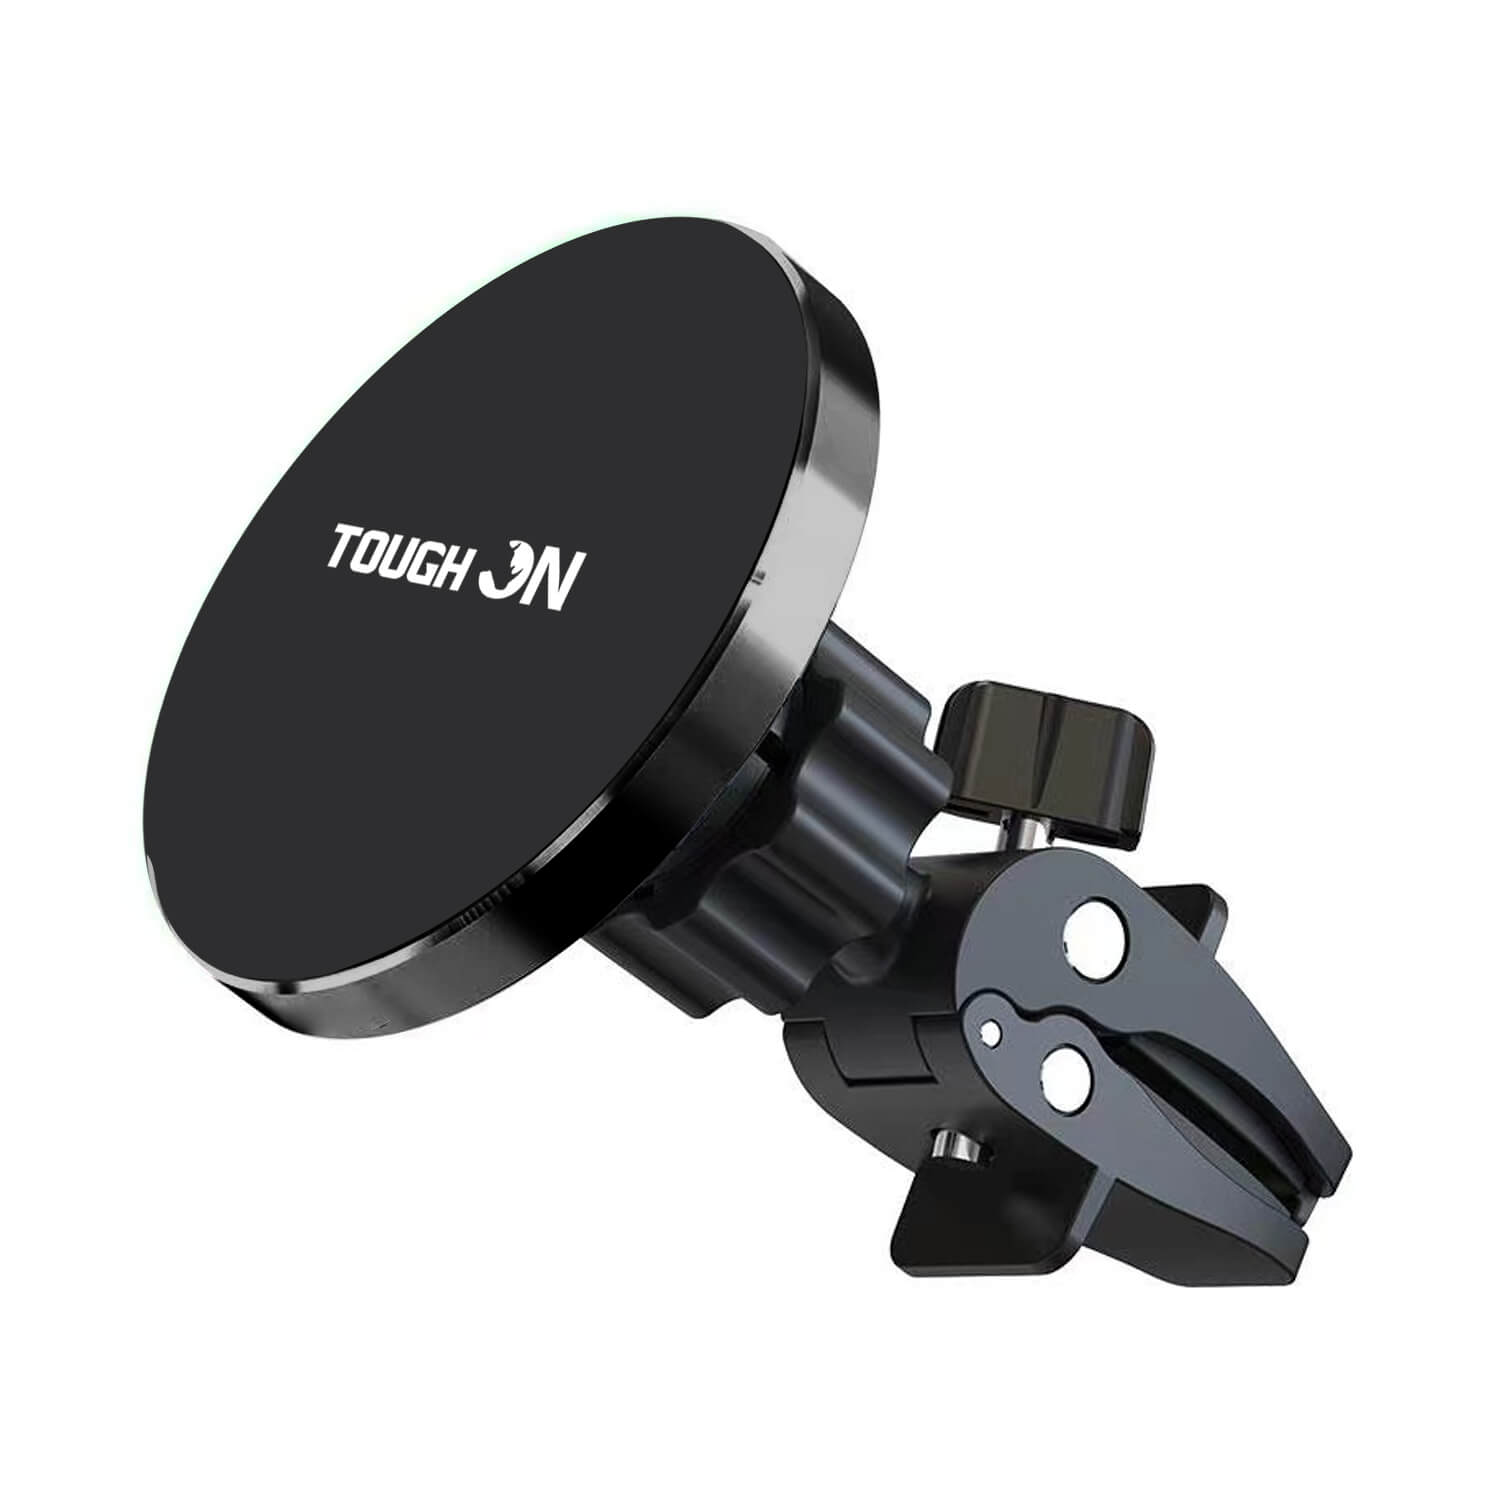 Tough On Power Universal Magnetic Car Mount 2 in 1